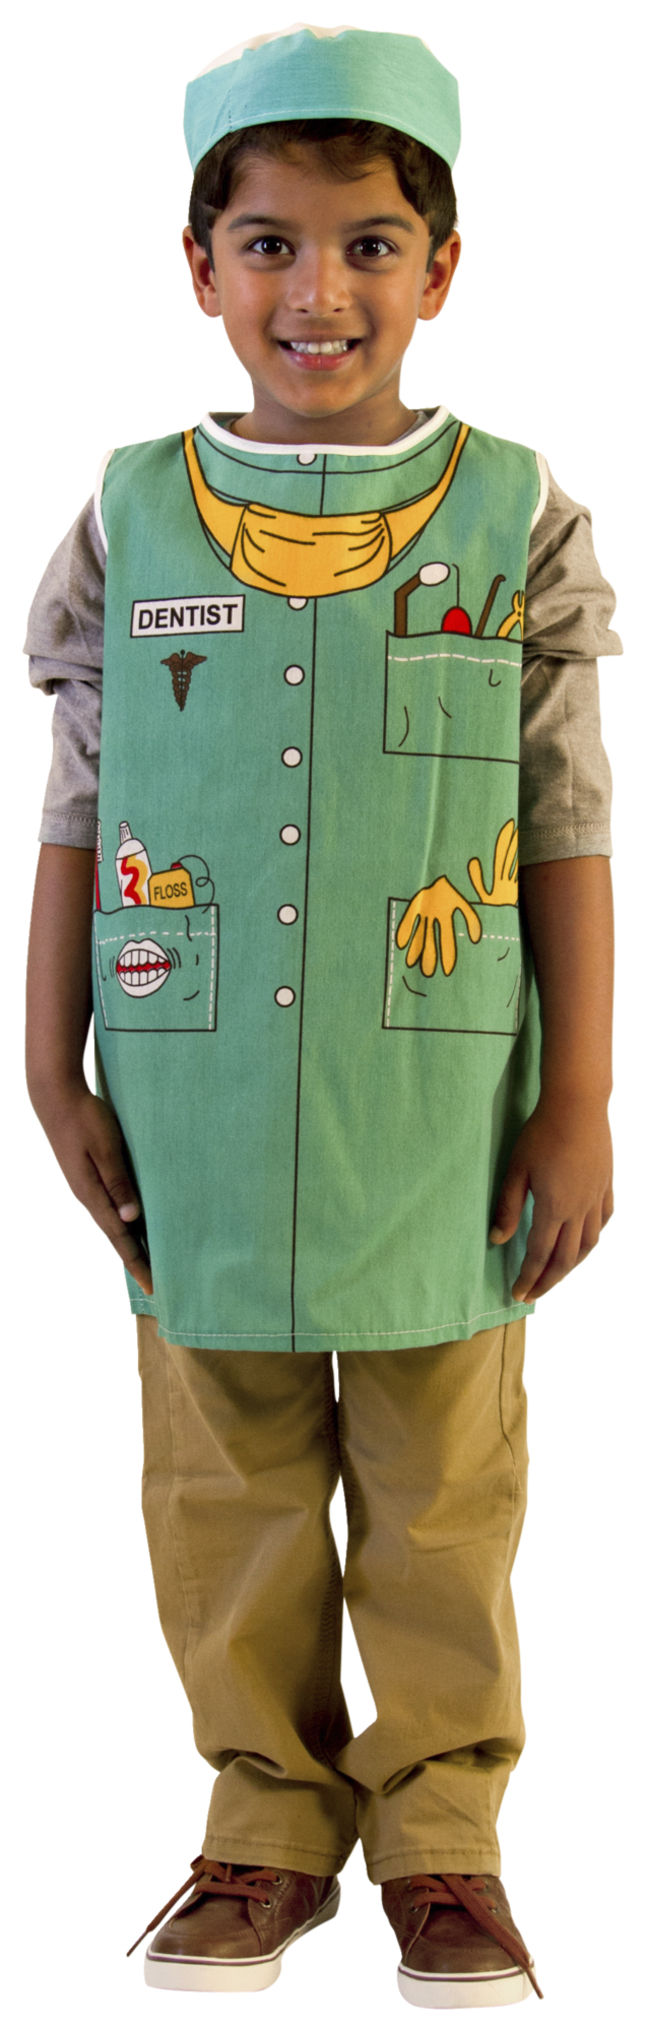 Dramatic Play Dress Up, Role Play Costumes, Item Number 521351